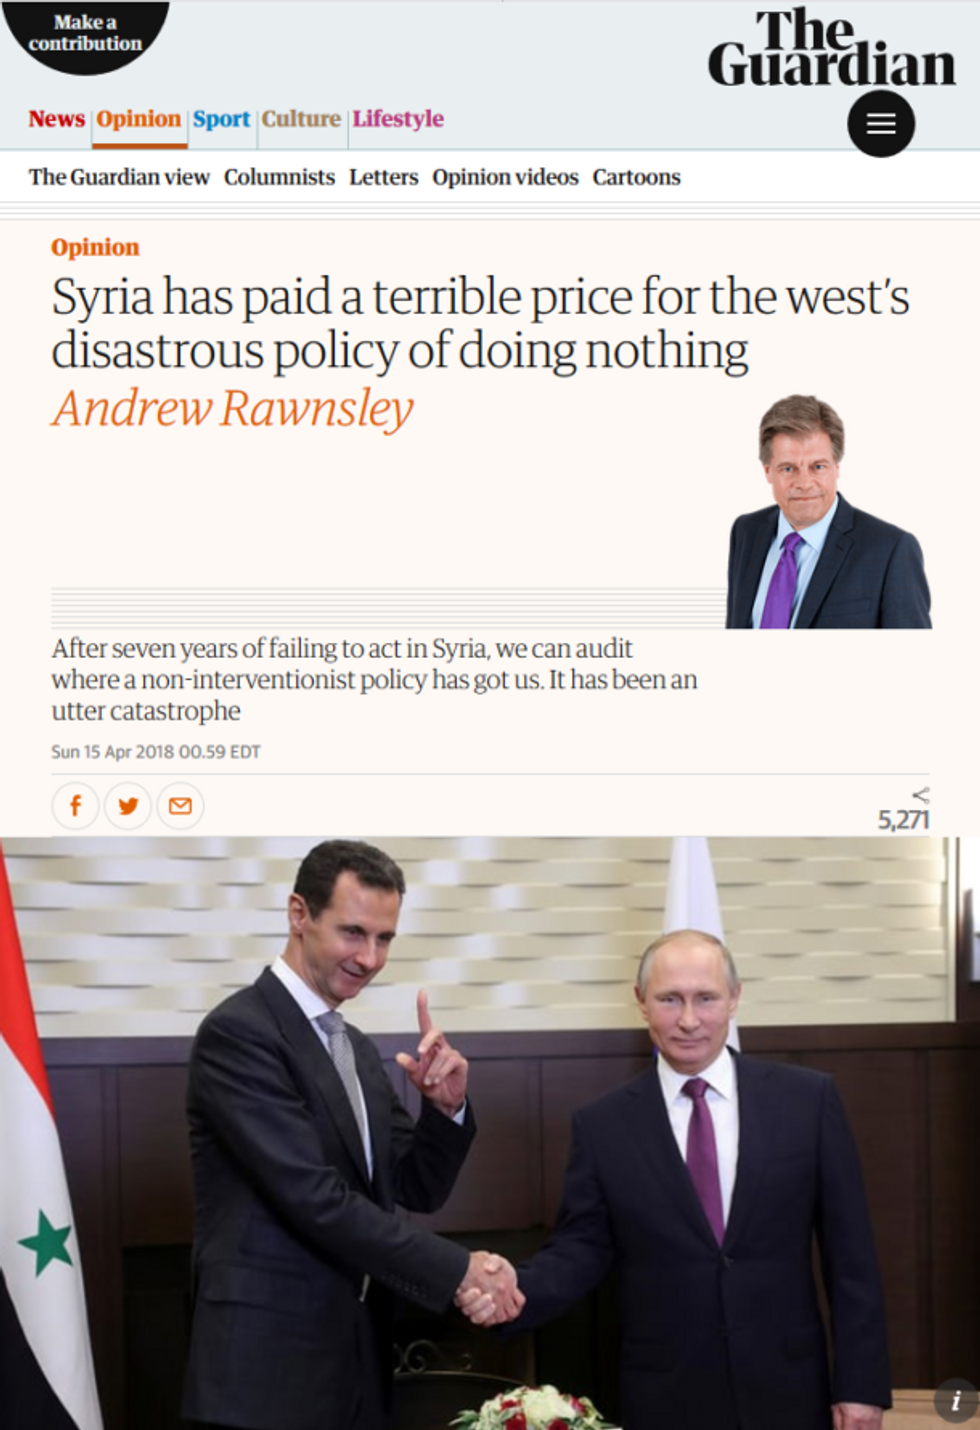 The Guardian (4/15/18) reports from a parallel universe where the US, Britain and their allies have not spent billions of dollars over seven years trying to bring down the Syrian government.